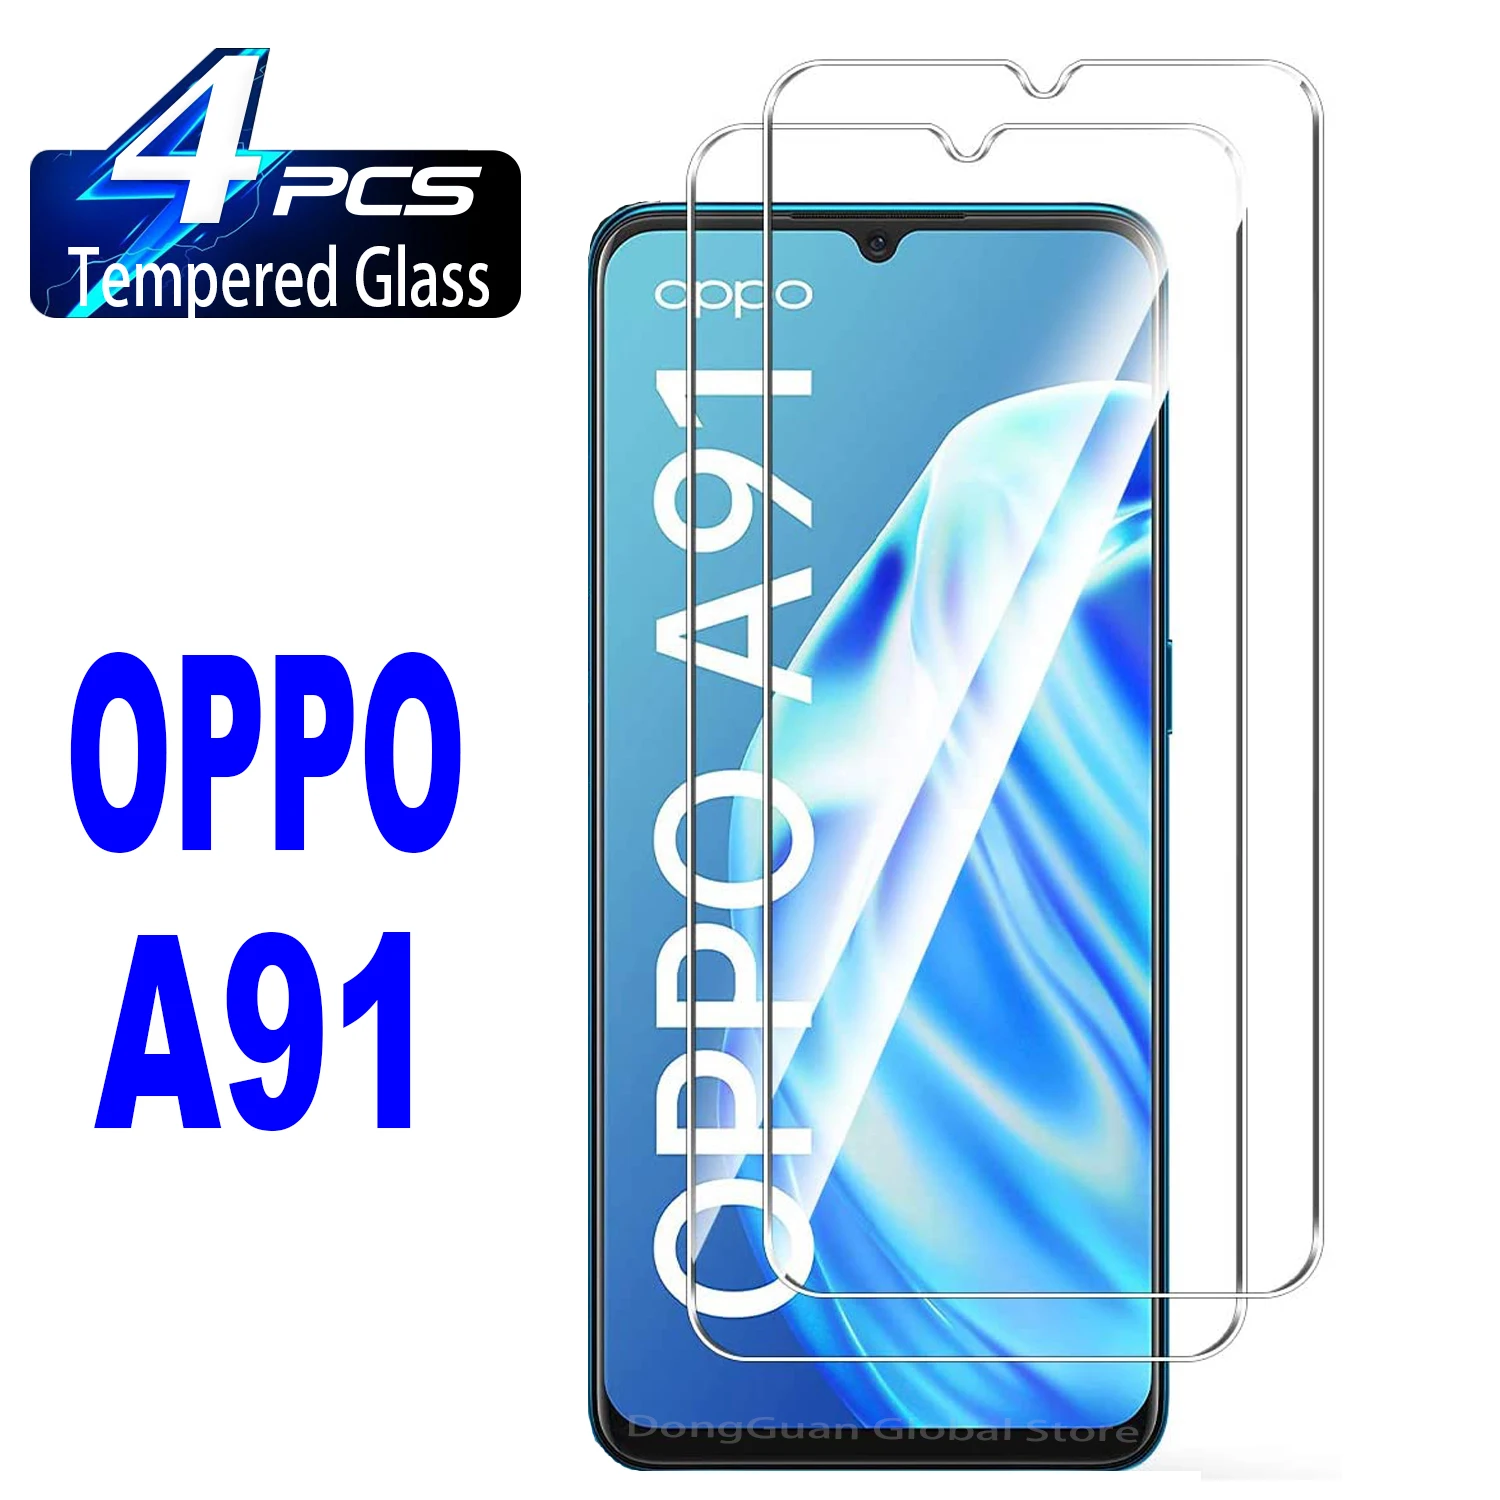 2/4Pcs Tempered Glass For OPPO A91 Screen Protector Glass Film 3pcs screen protector glass for oppo a91 a72 a73 5g a92 a5 a9 2020 protective glass for oppo a53 a52 a54 a55 a32 a31 a74 glass